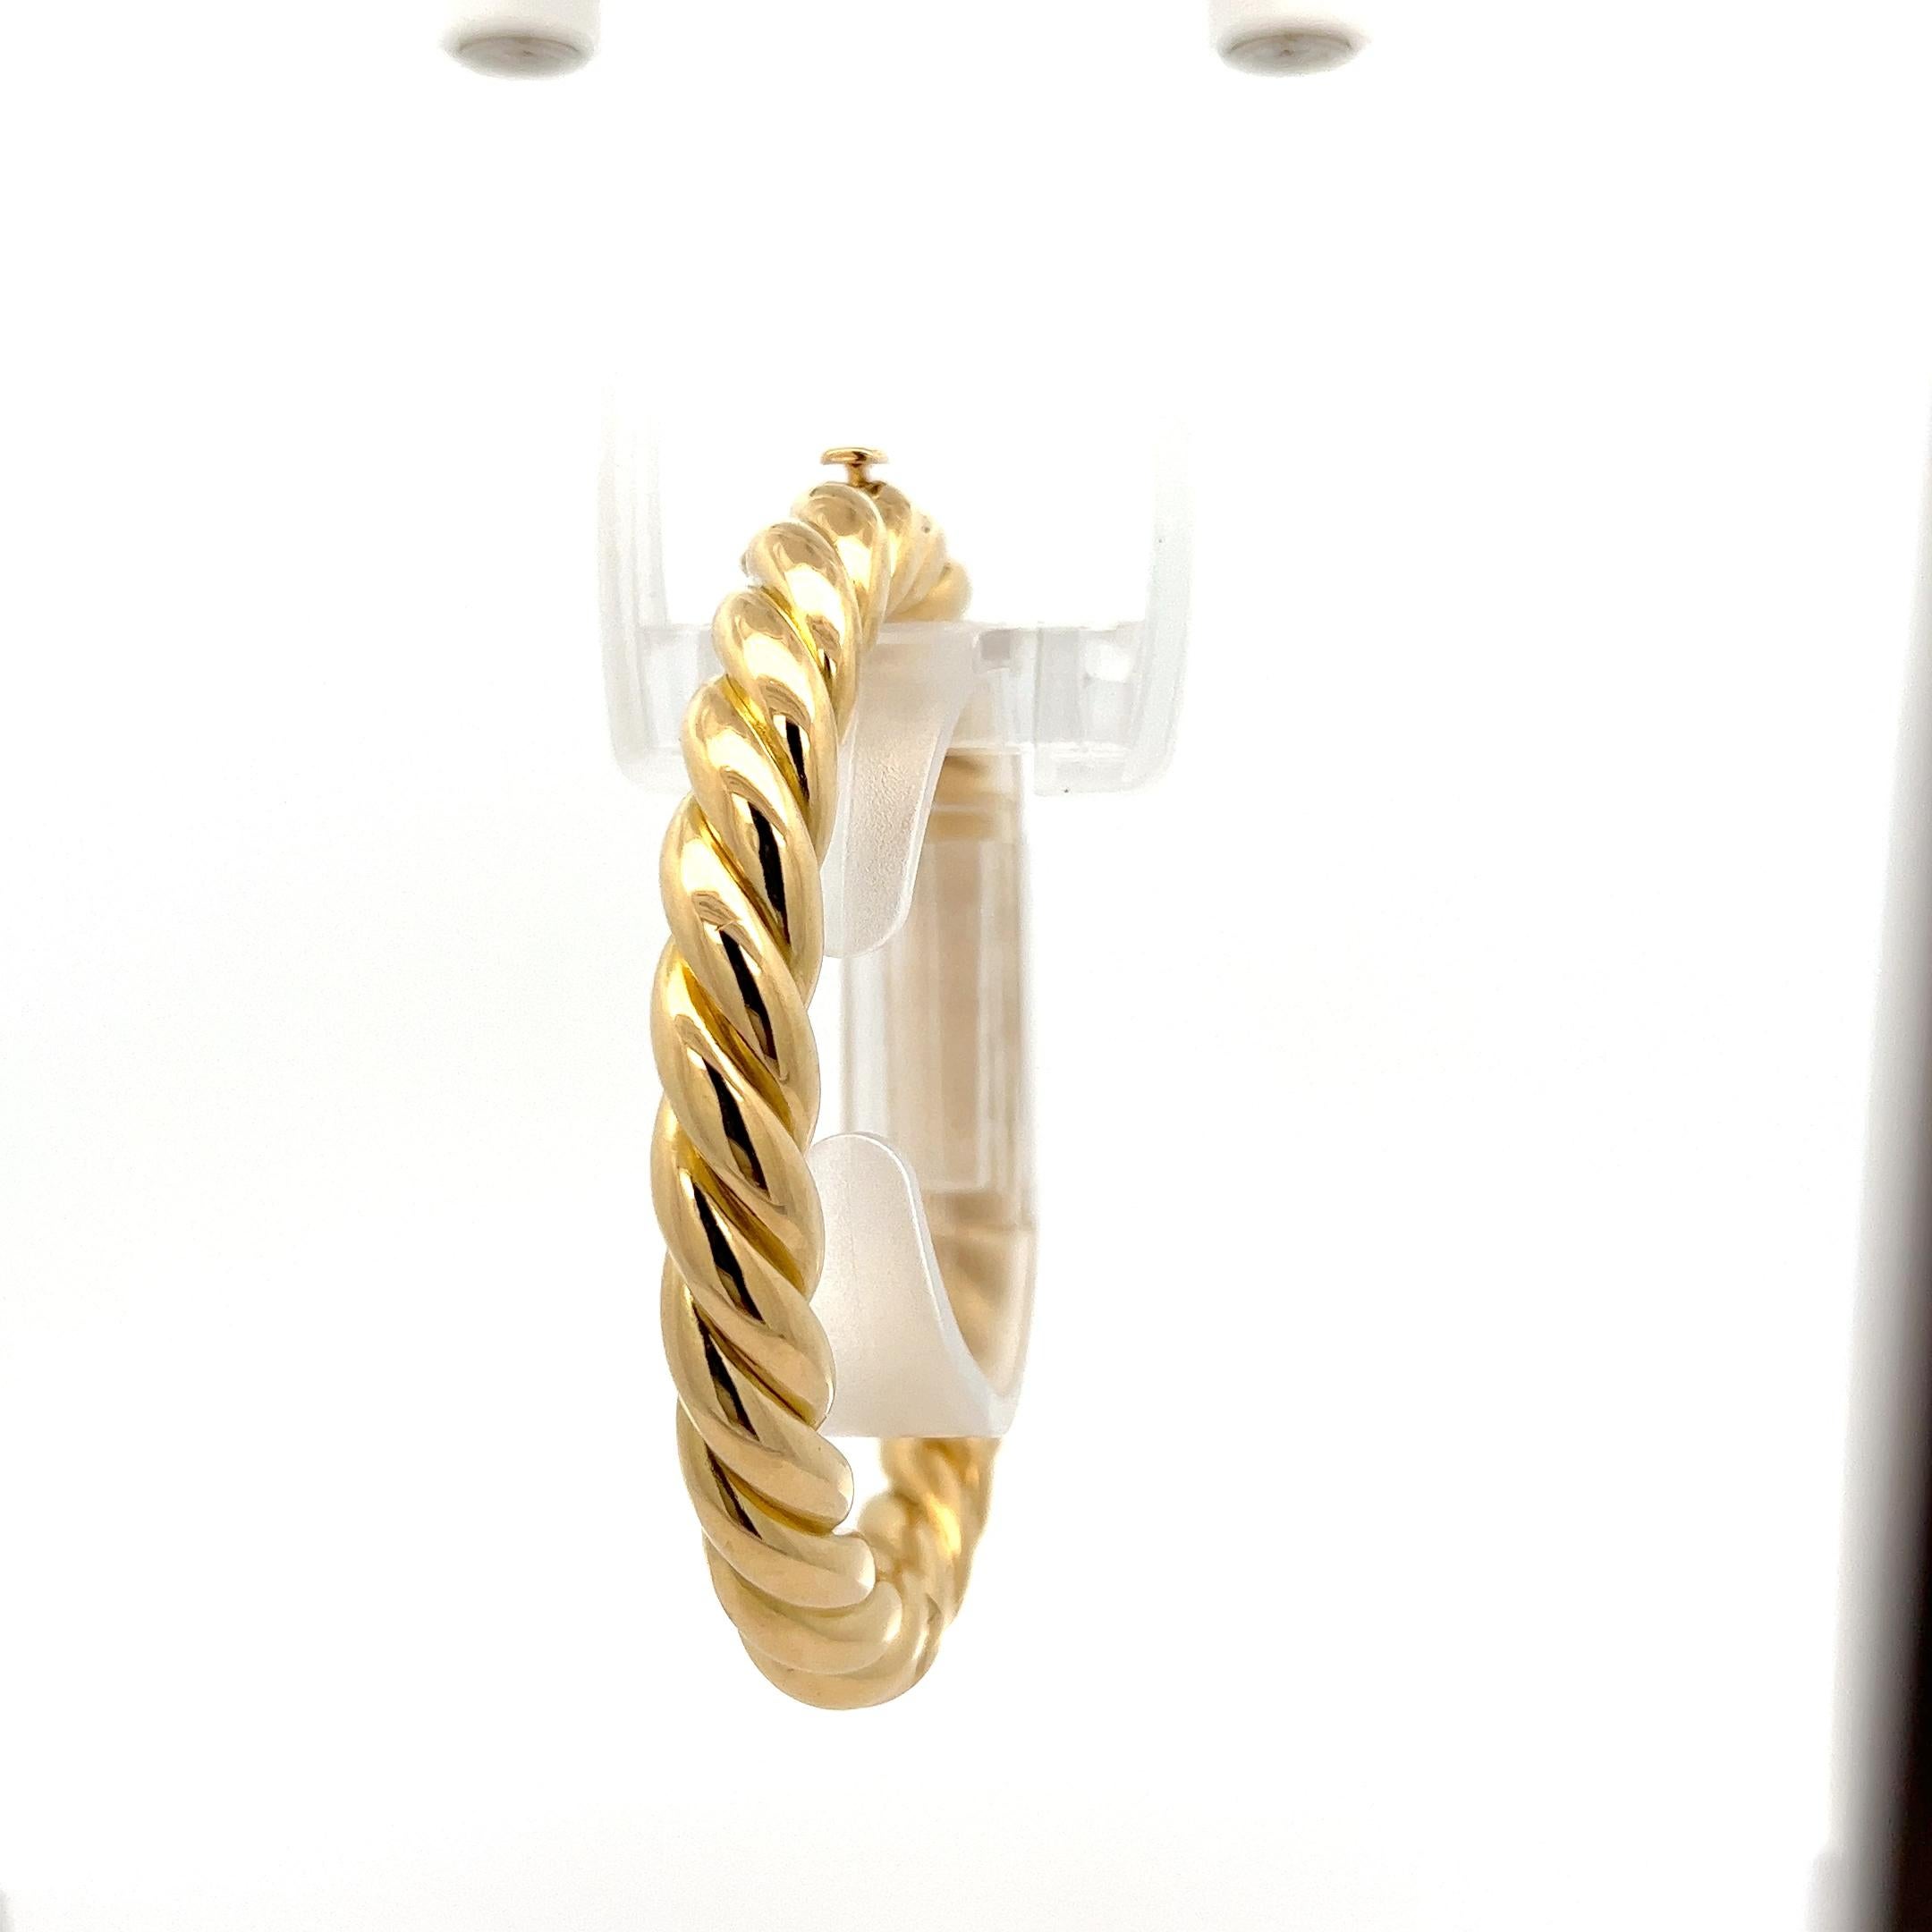 Material: Solid 18K Yellow Gold
Weight: 40.11 Grams
Type: Puffed Cable Hinged Open Bangle Bracelet
Length: Will fit up to a 7 inch wrist (Fitted on a wrist)
Clasp: Push Clasp w/ Safety Latch
Width: 8.6mm 
Thickness: 8.7mm rise off the wrist